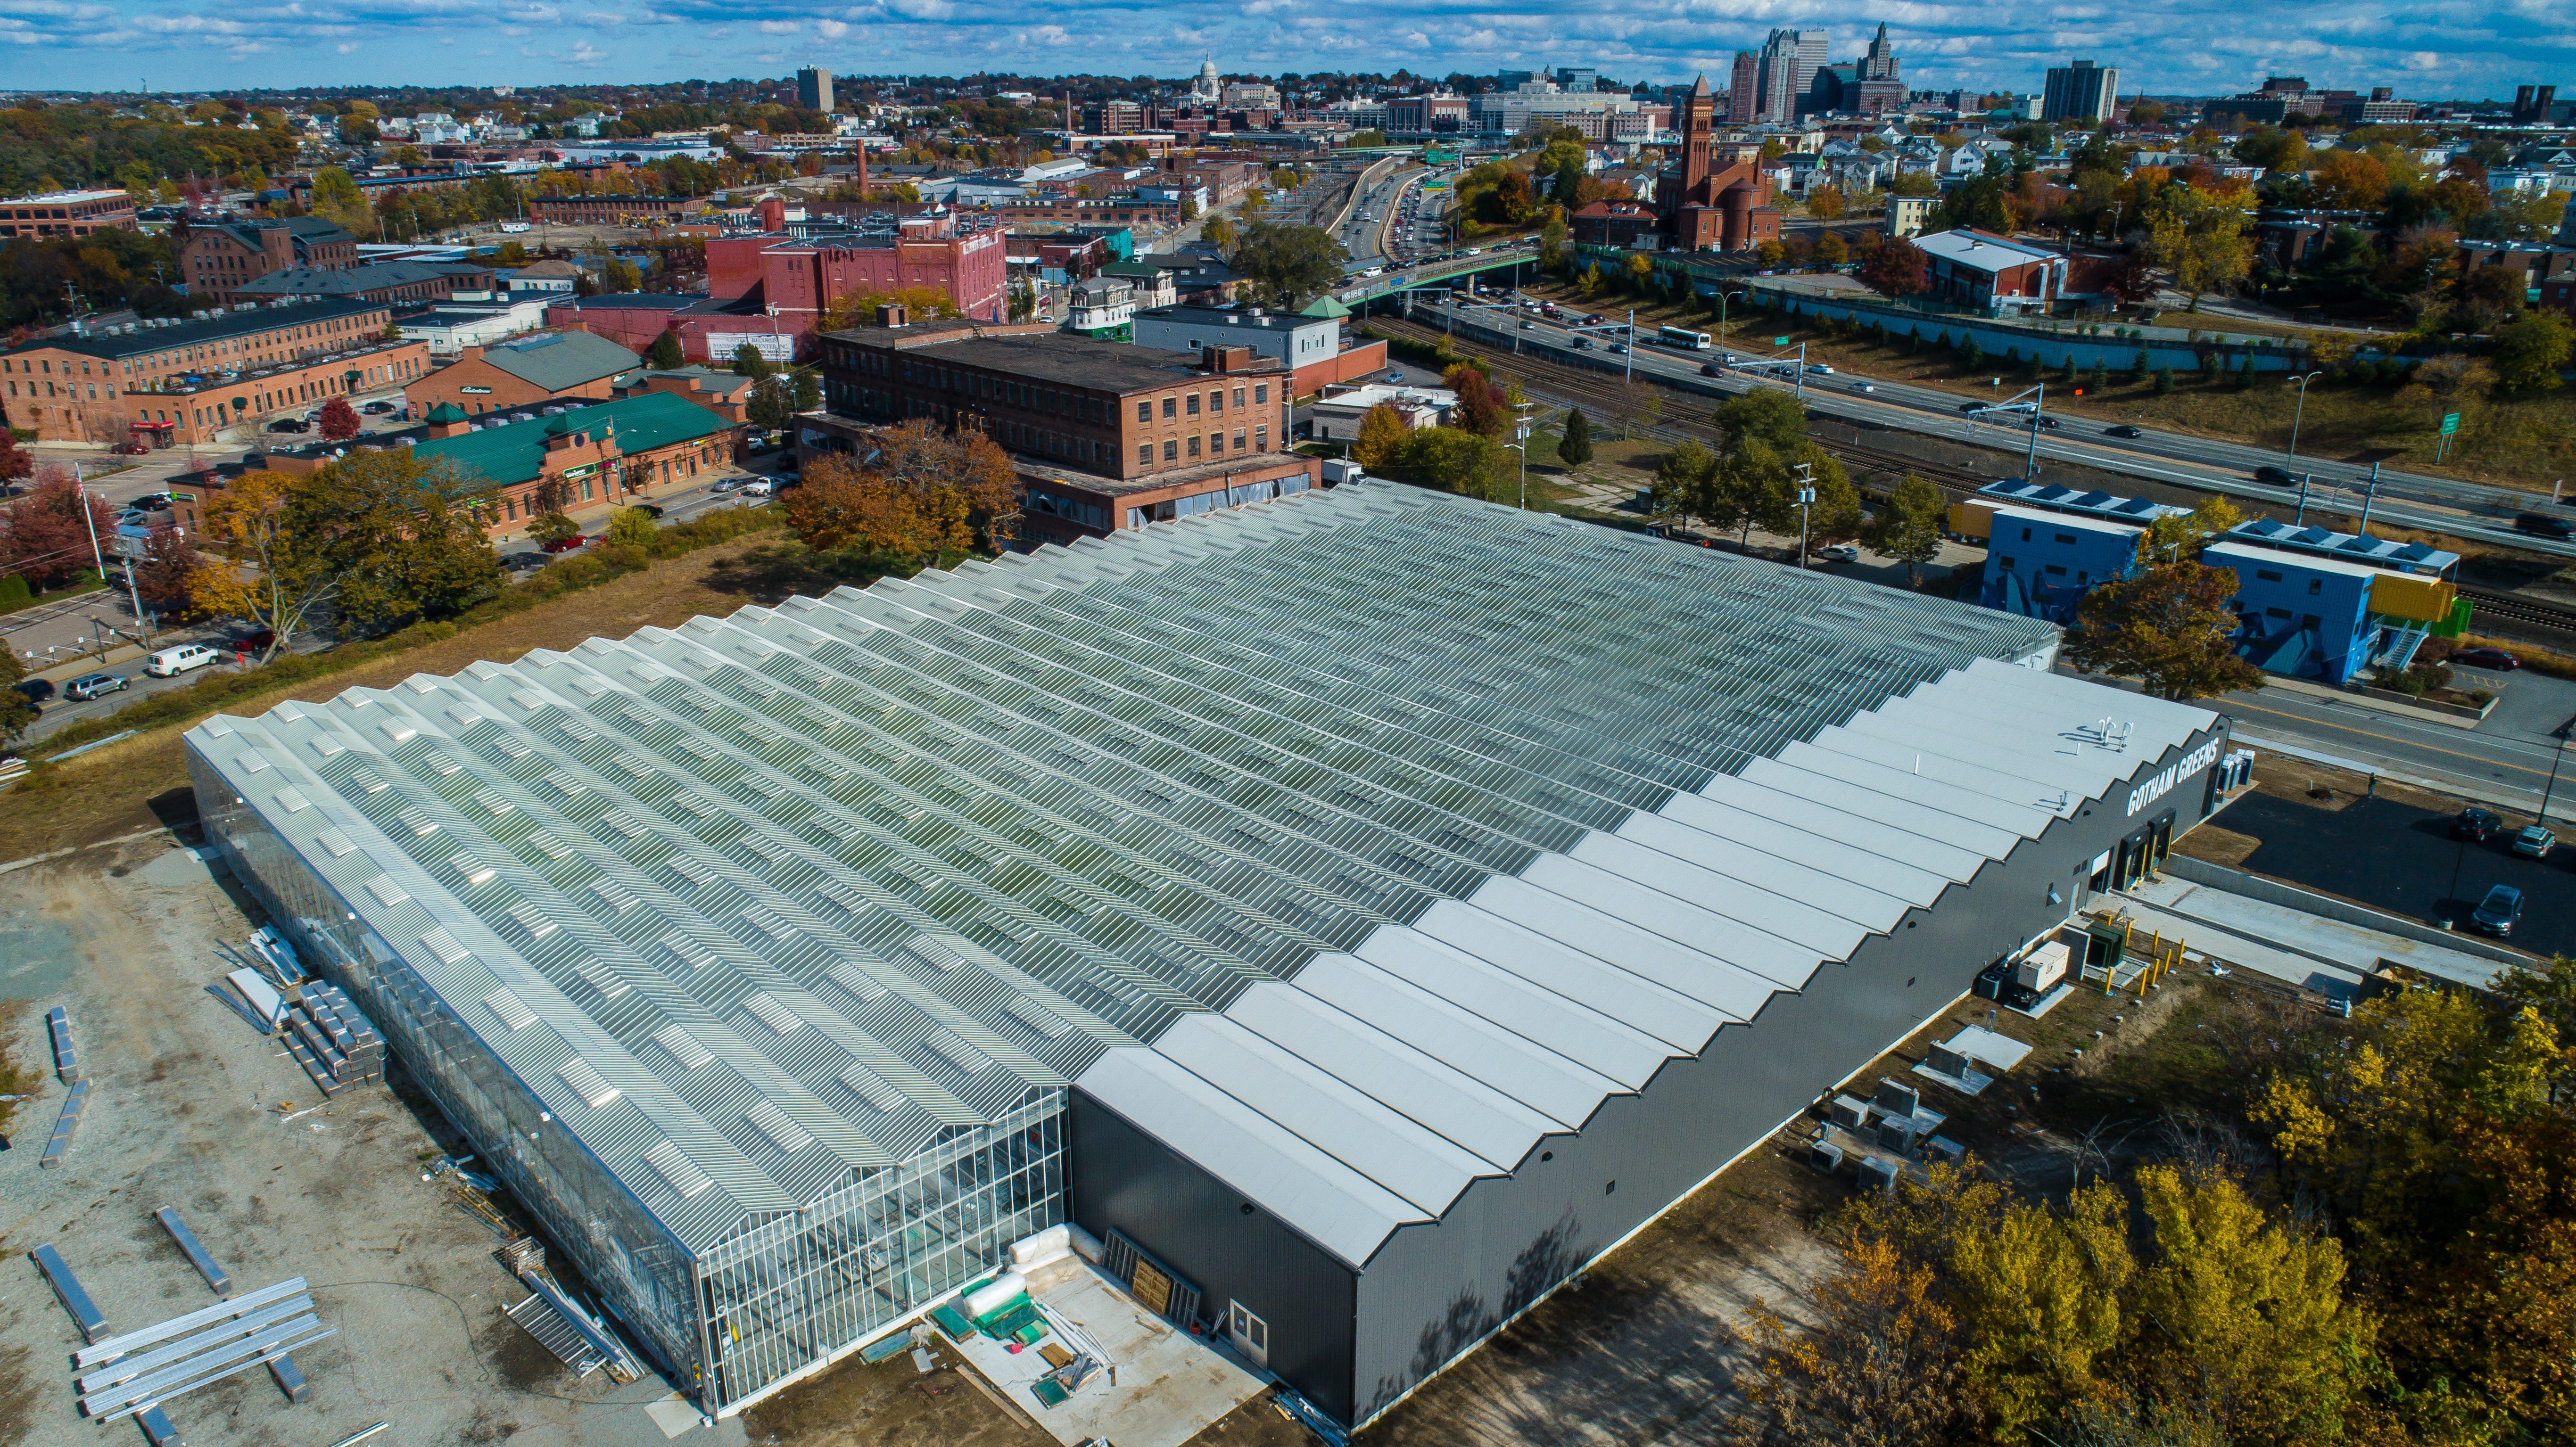 Gotham Greens Expands Into Chicago With New Rooftop Greenhouse